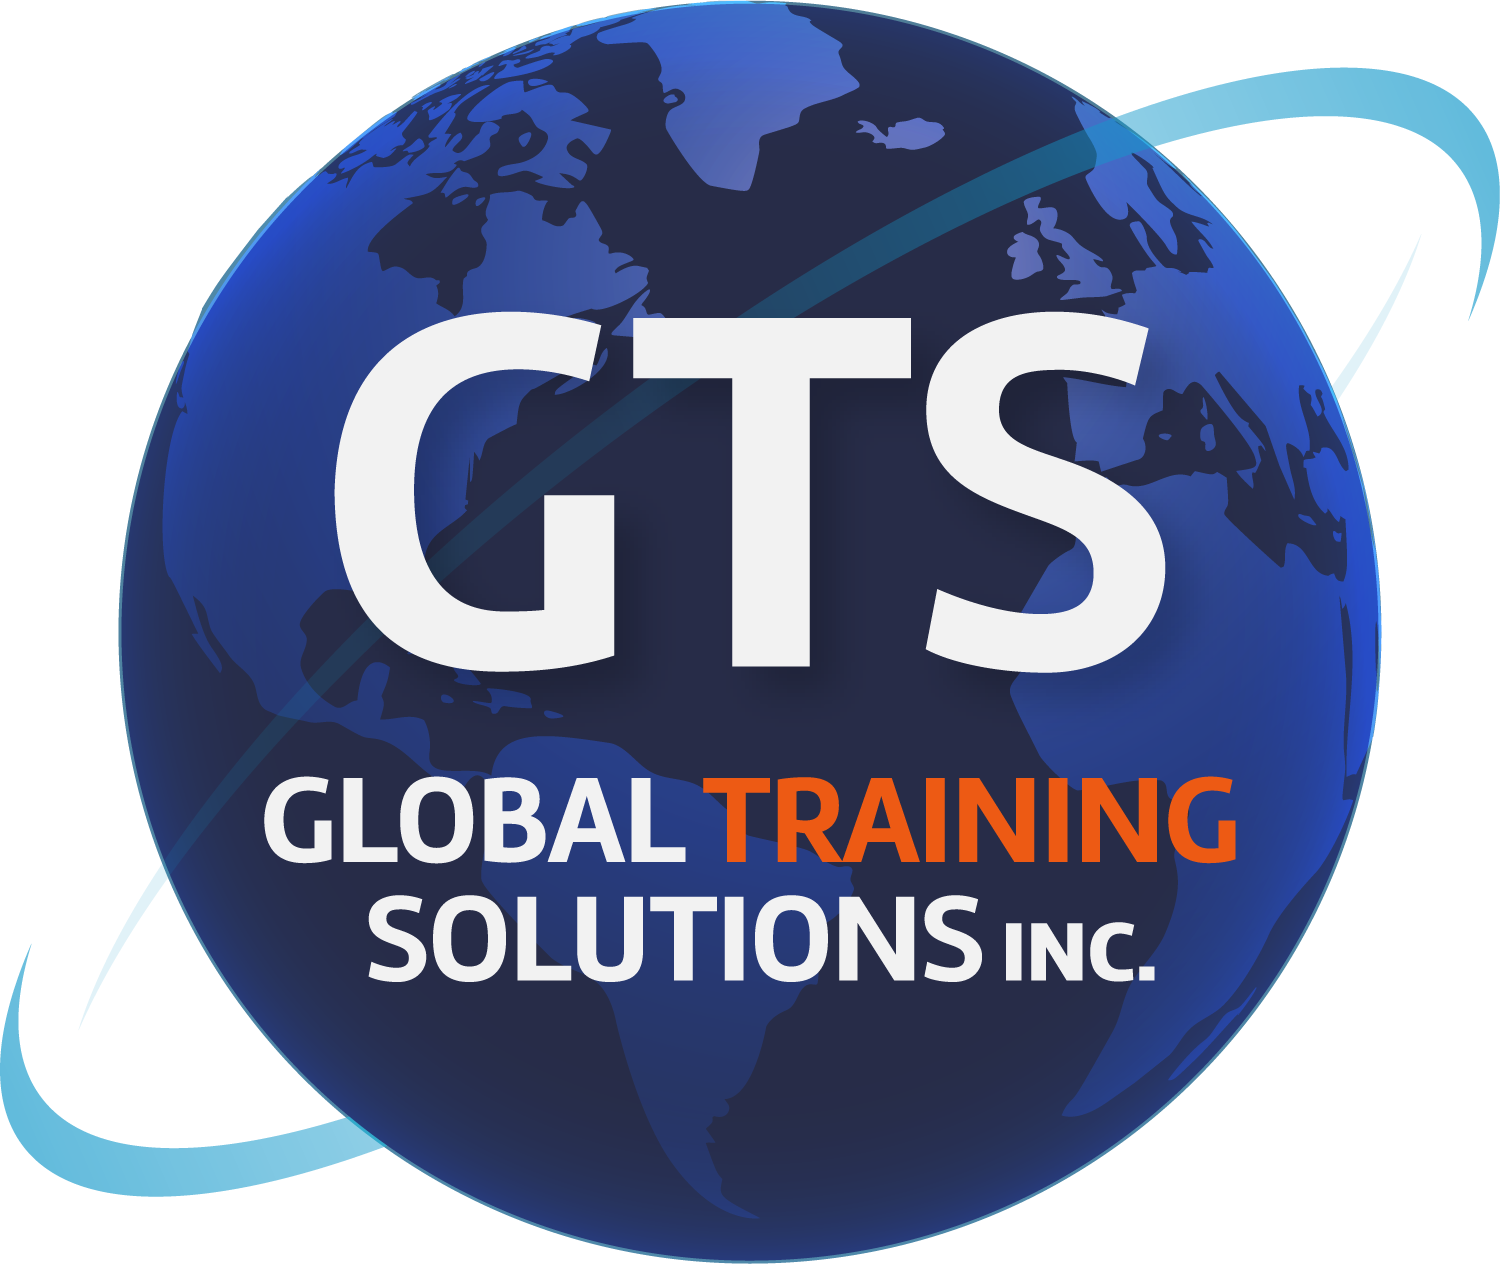 Global Training Solutions